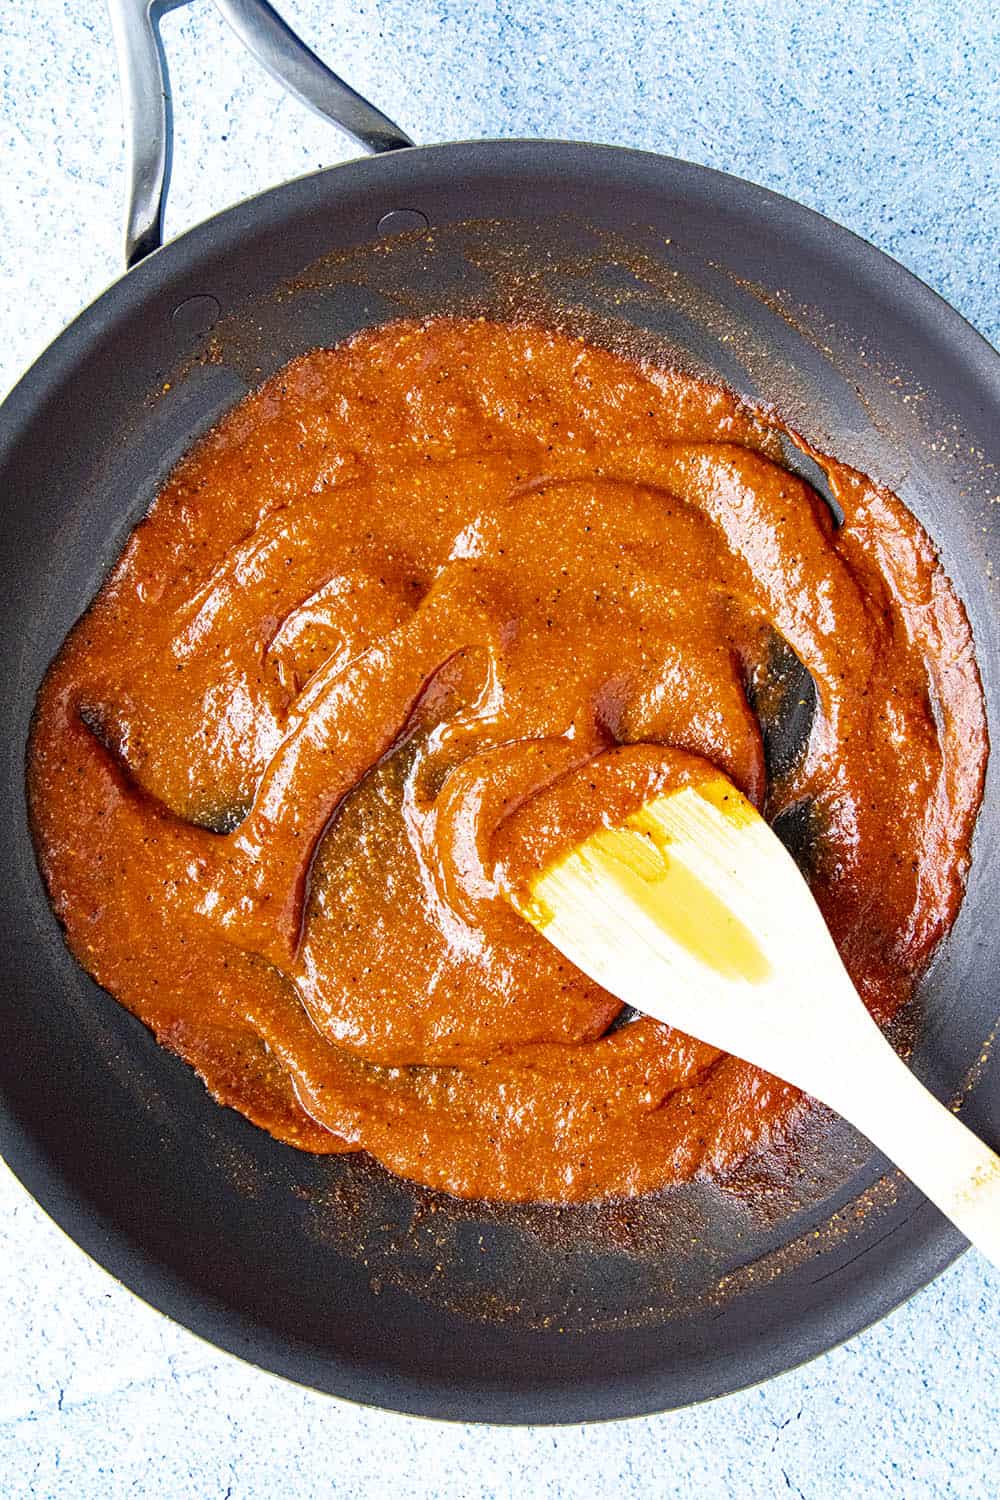 Stirring the bbq sauce in the pan